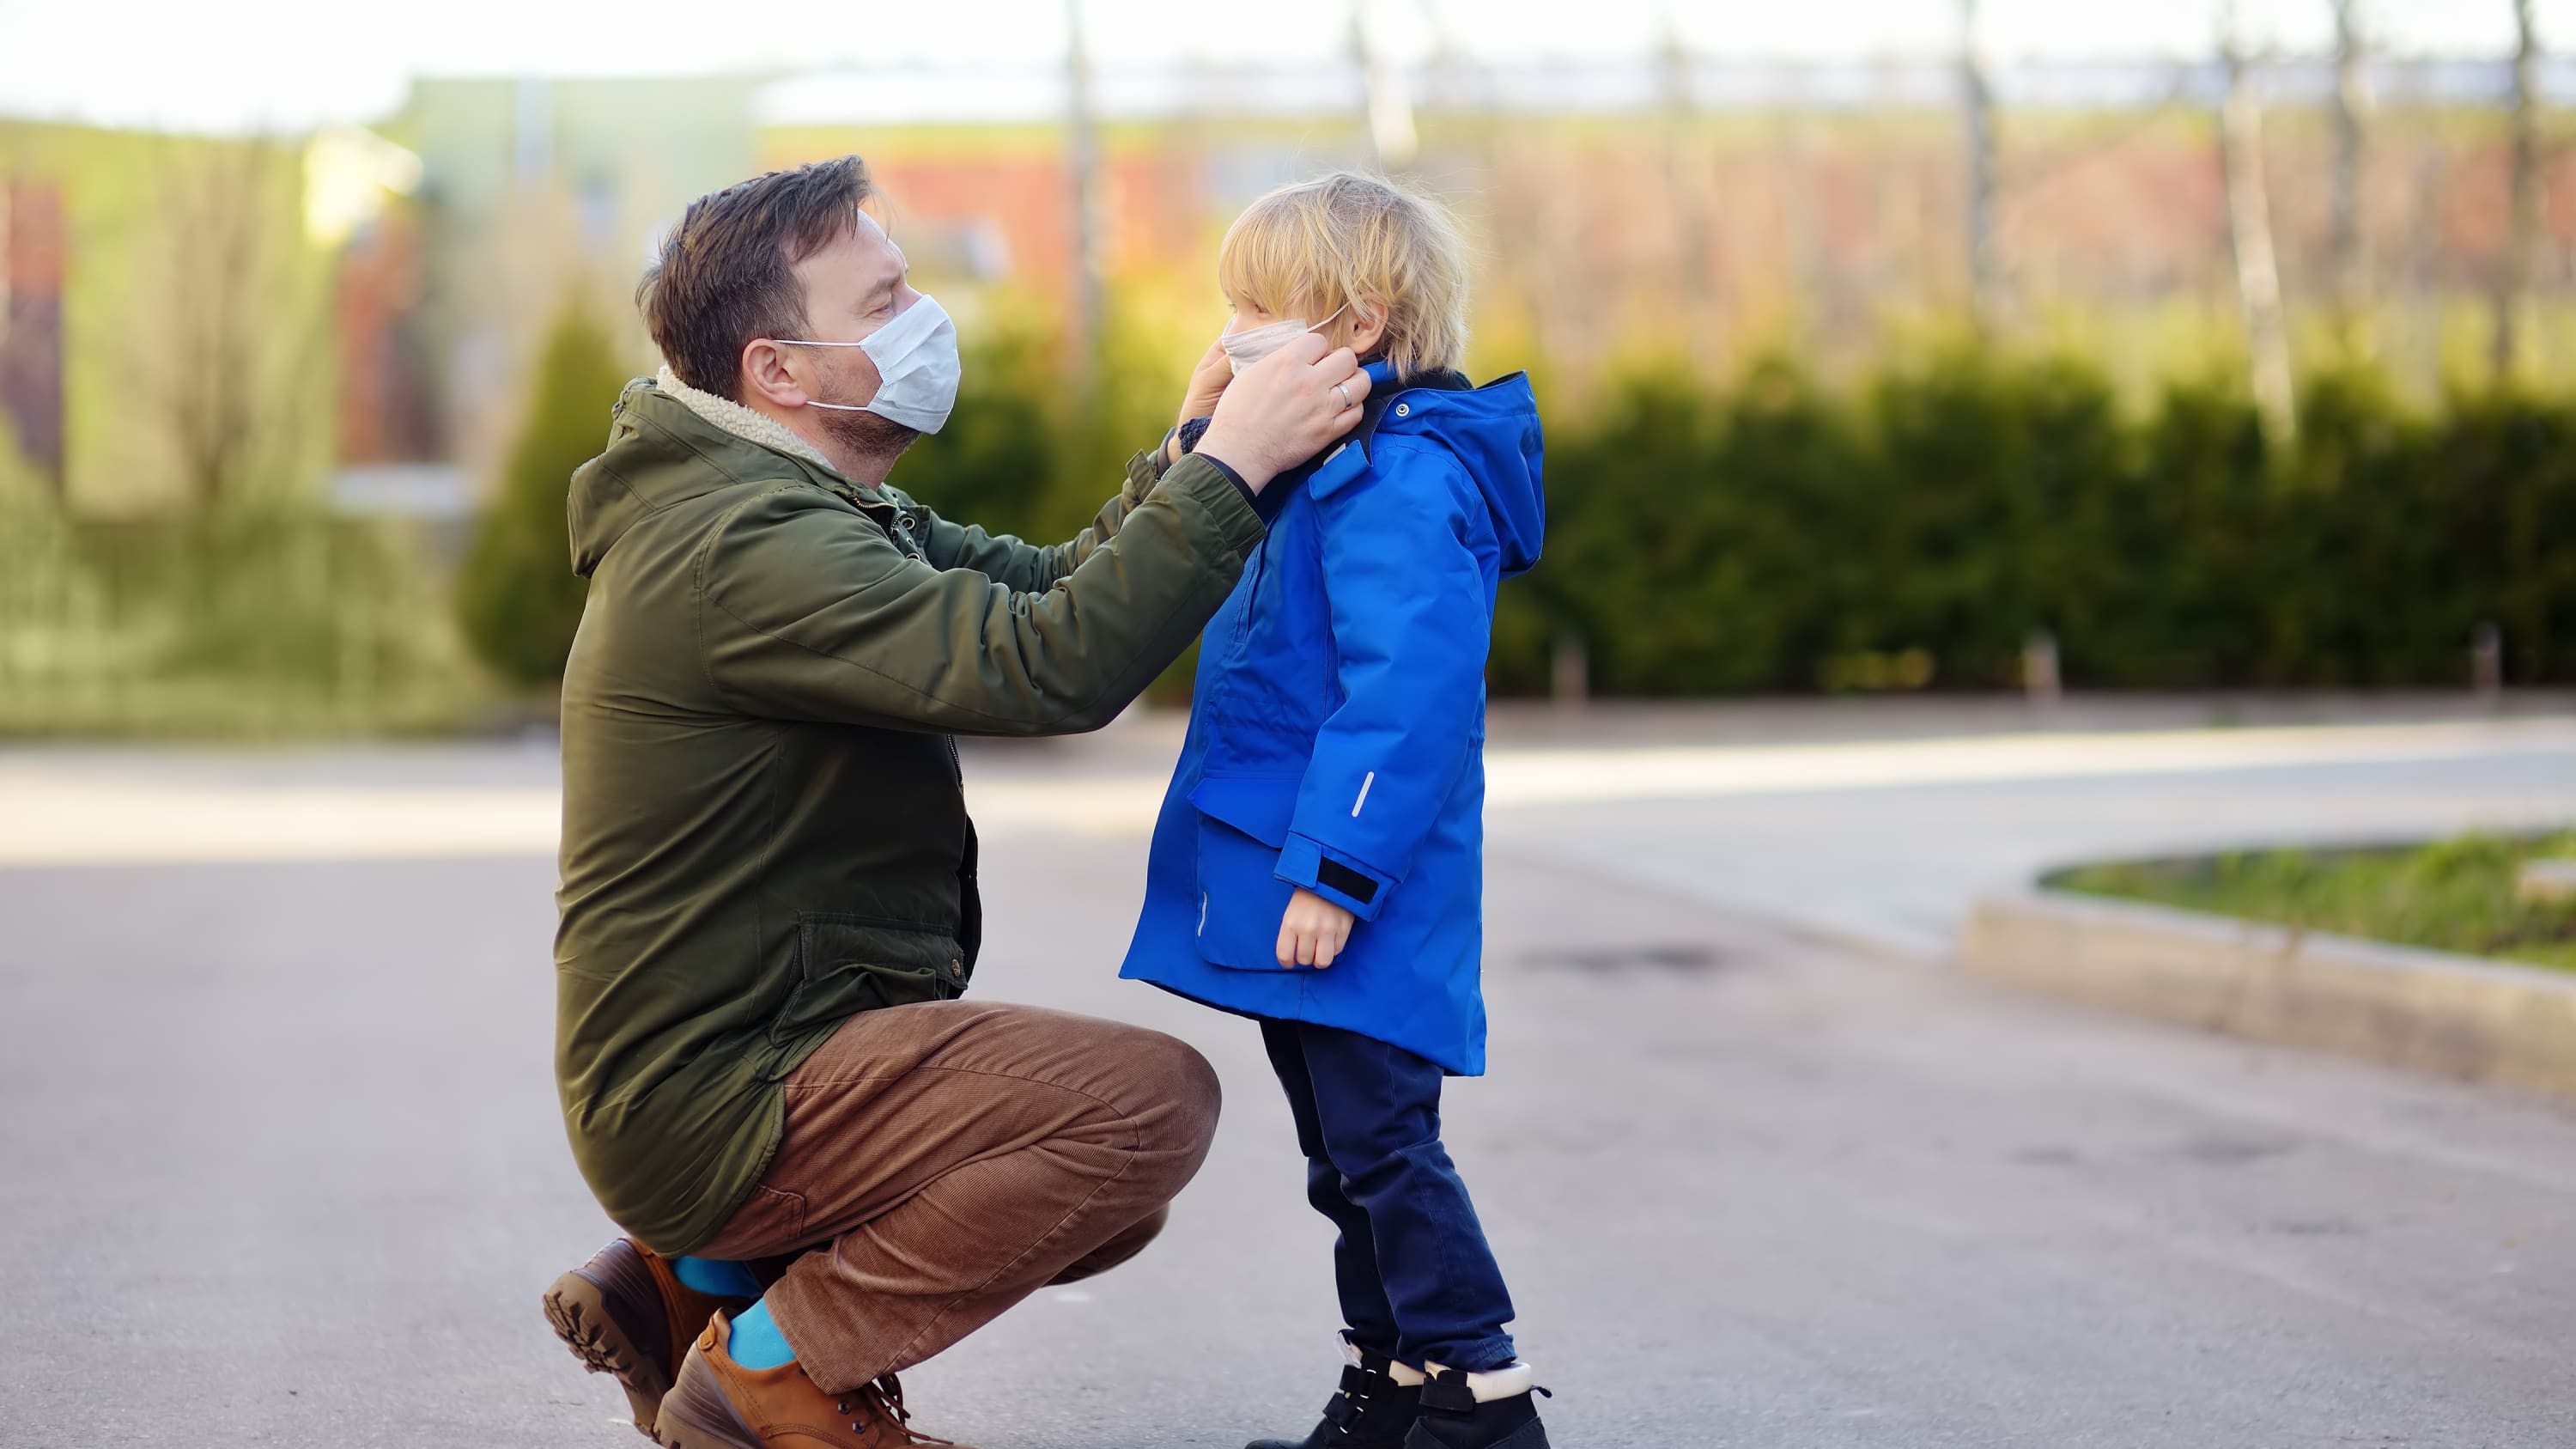 father putting face mask on son, possibly to protect against MIS-C, the syndrome in children associated with COVID-19